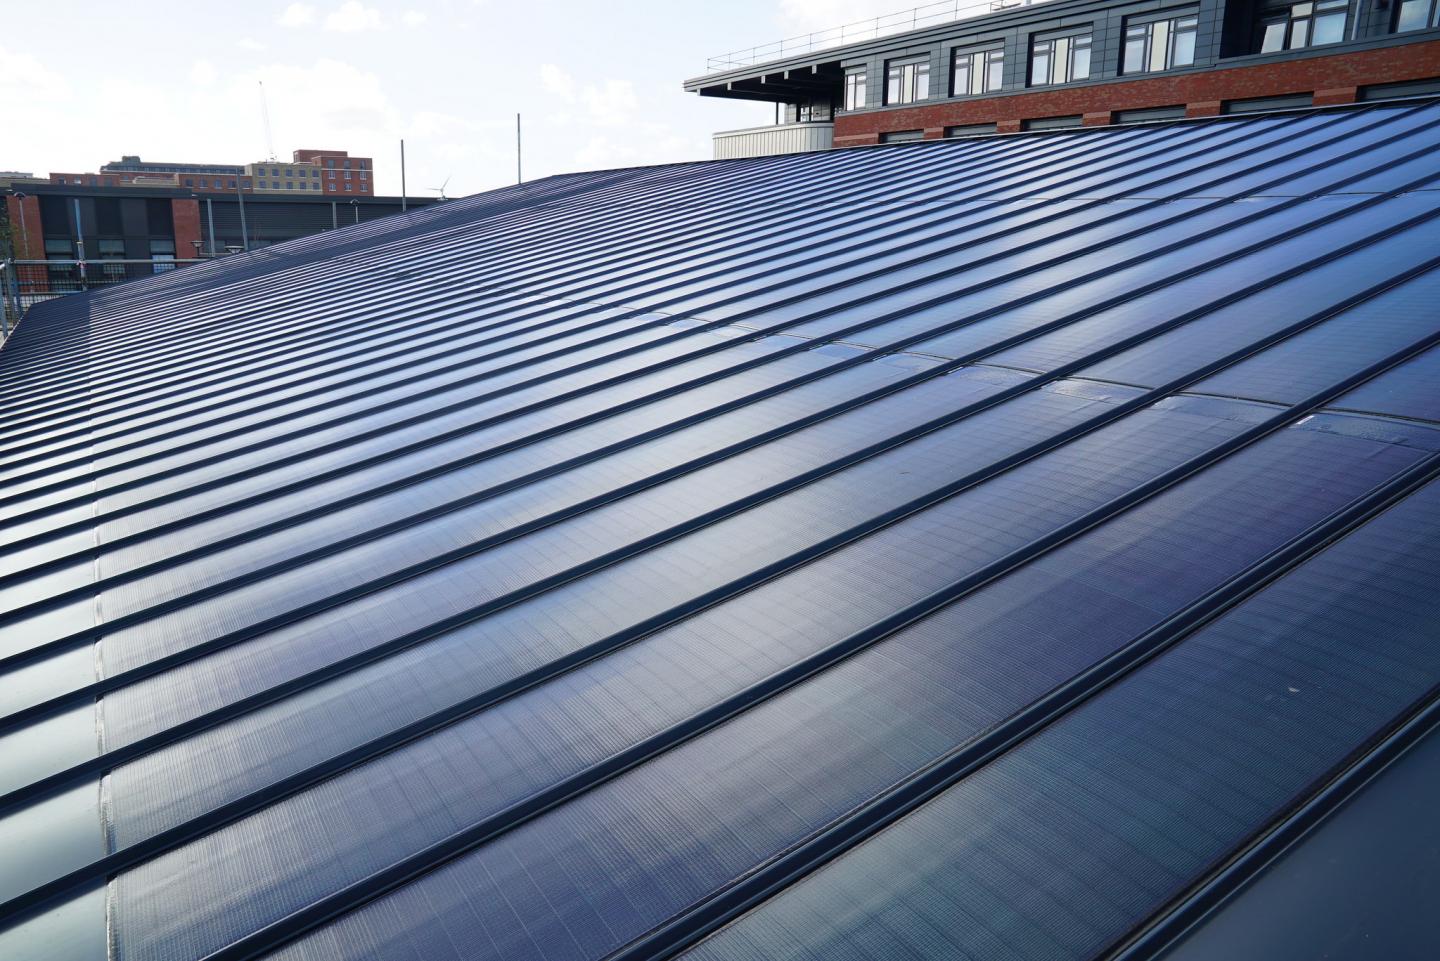 Roof with Integrated Photovoltaics (PV) to Generate Solar Energy